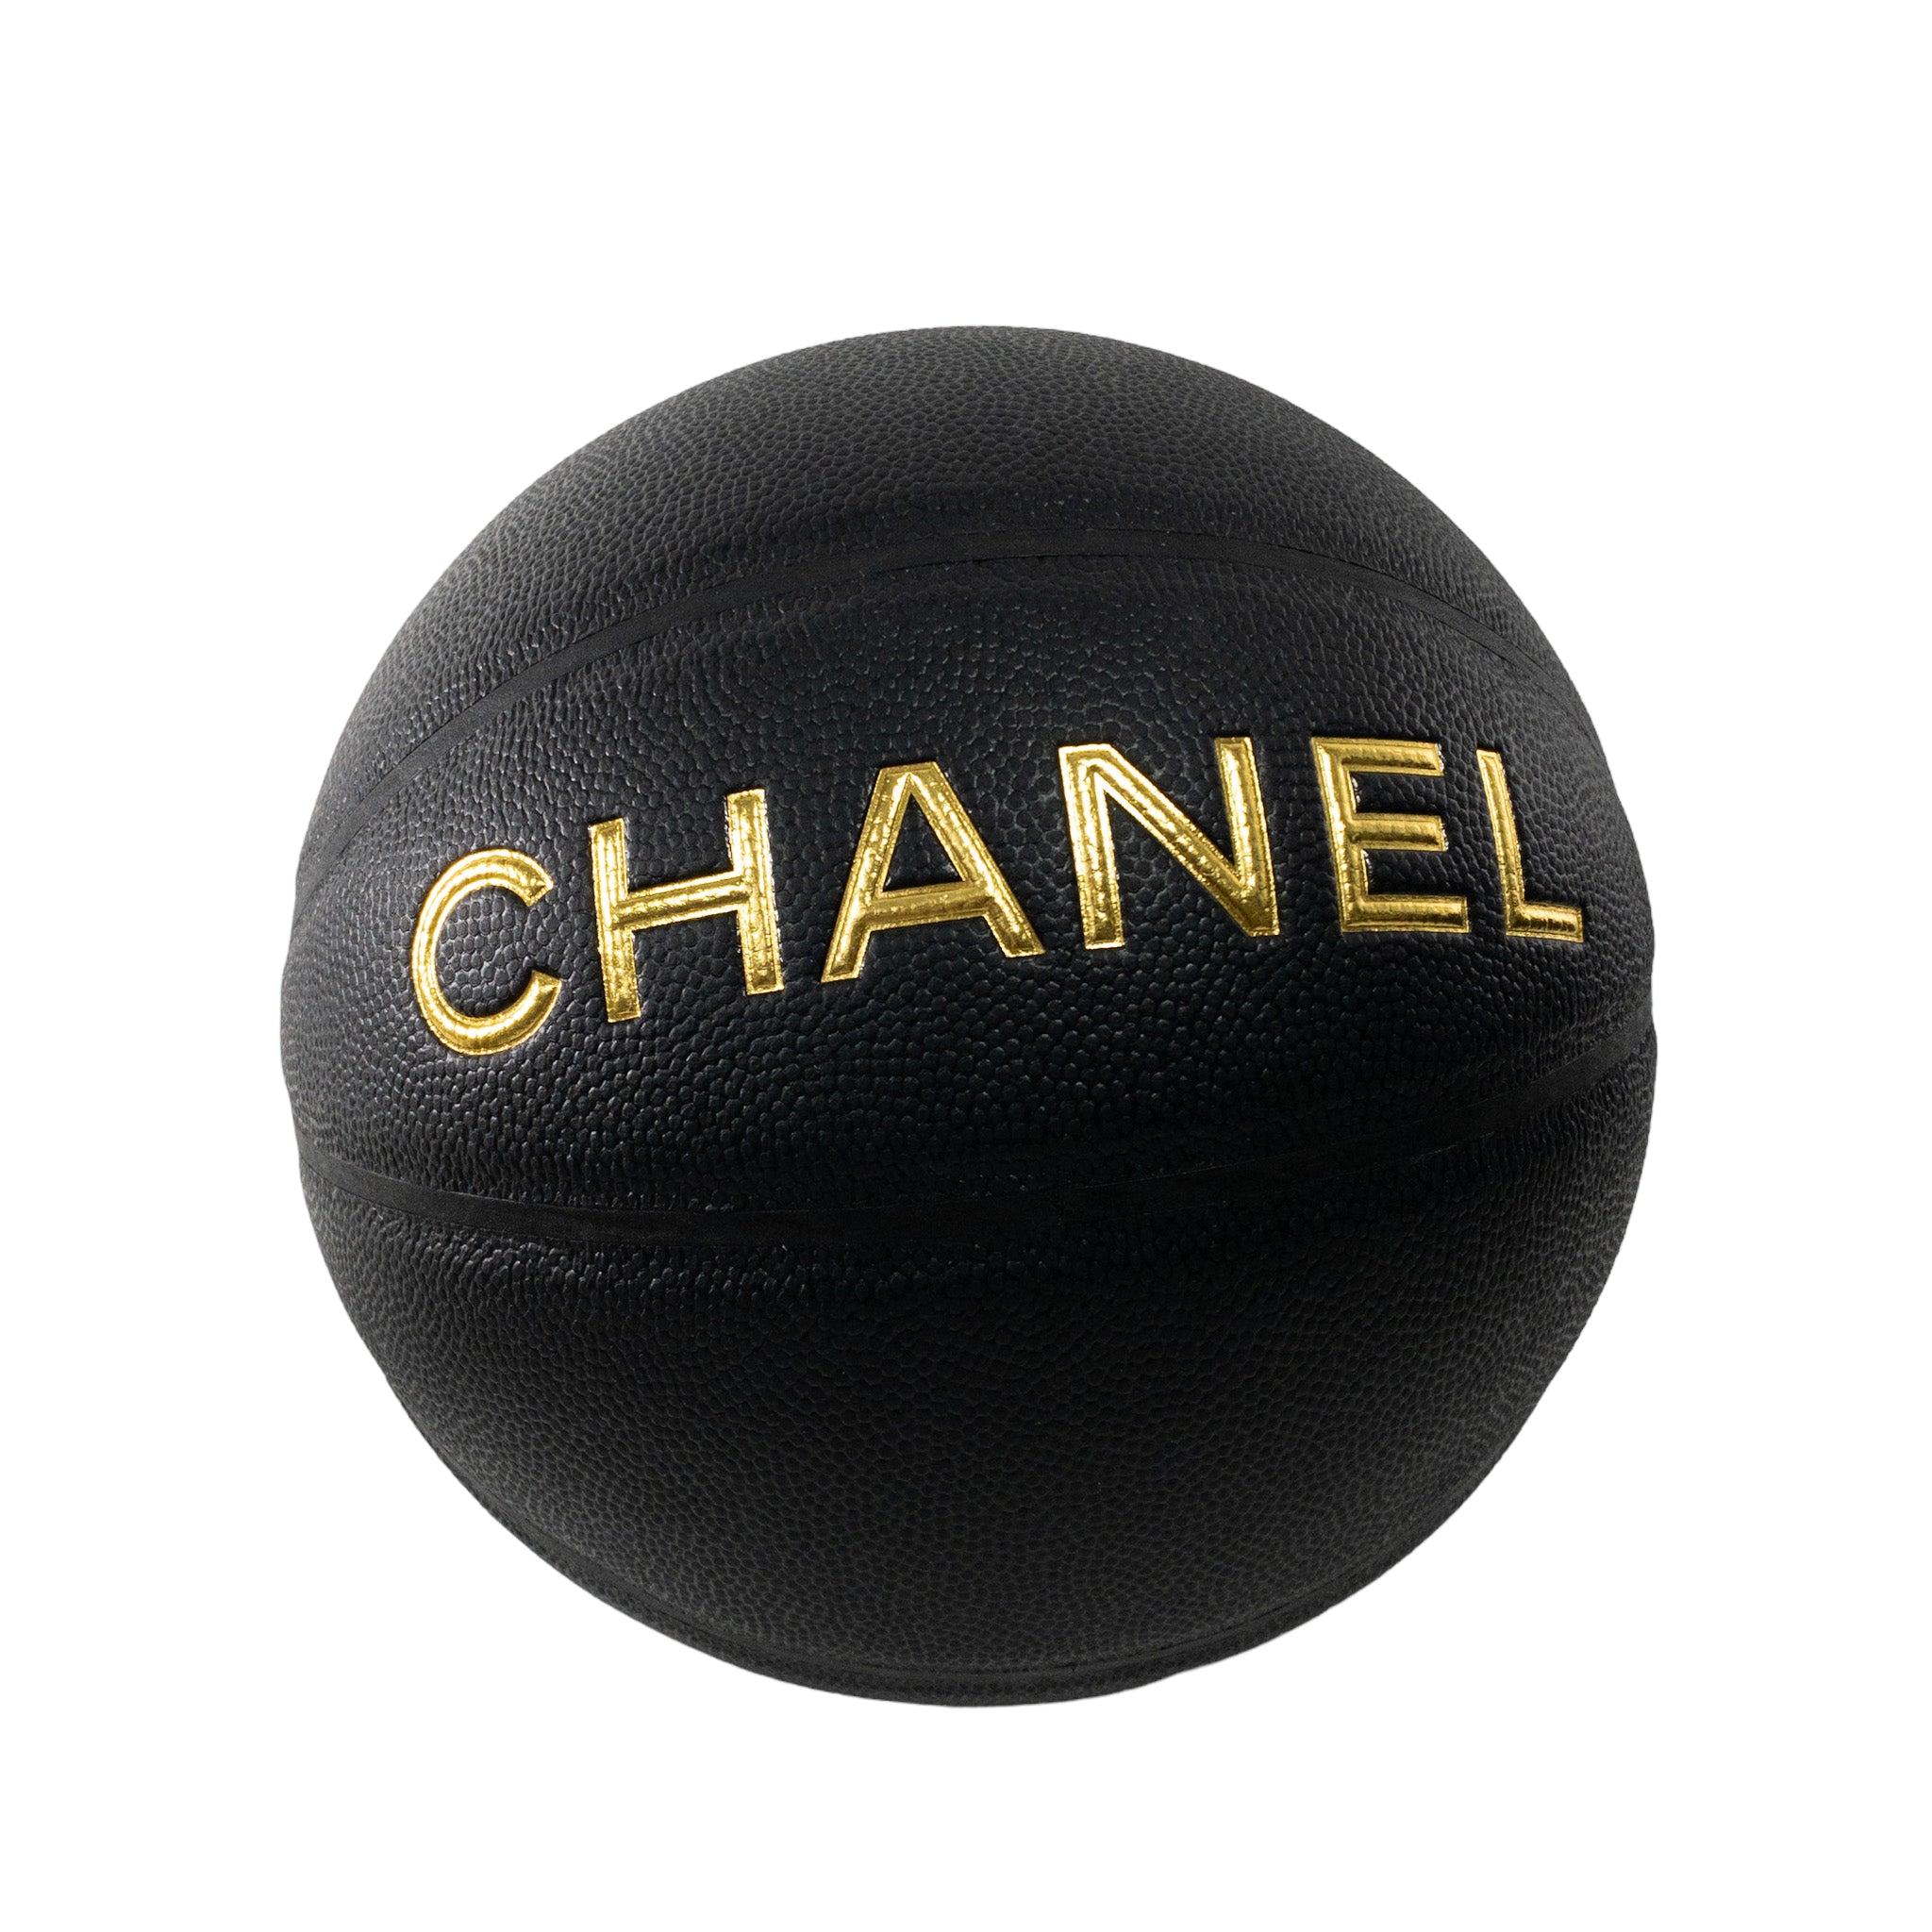 Chanel Limited Edition Basketball with Chain Harness, 2019 For Sale 1